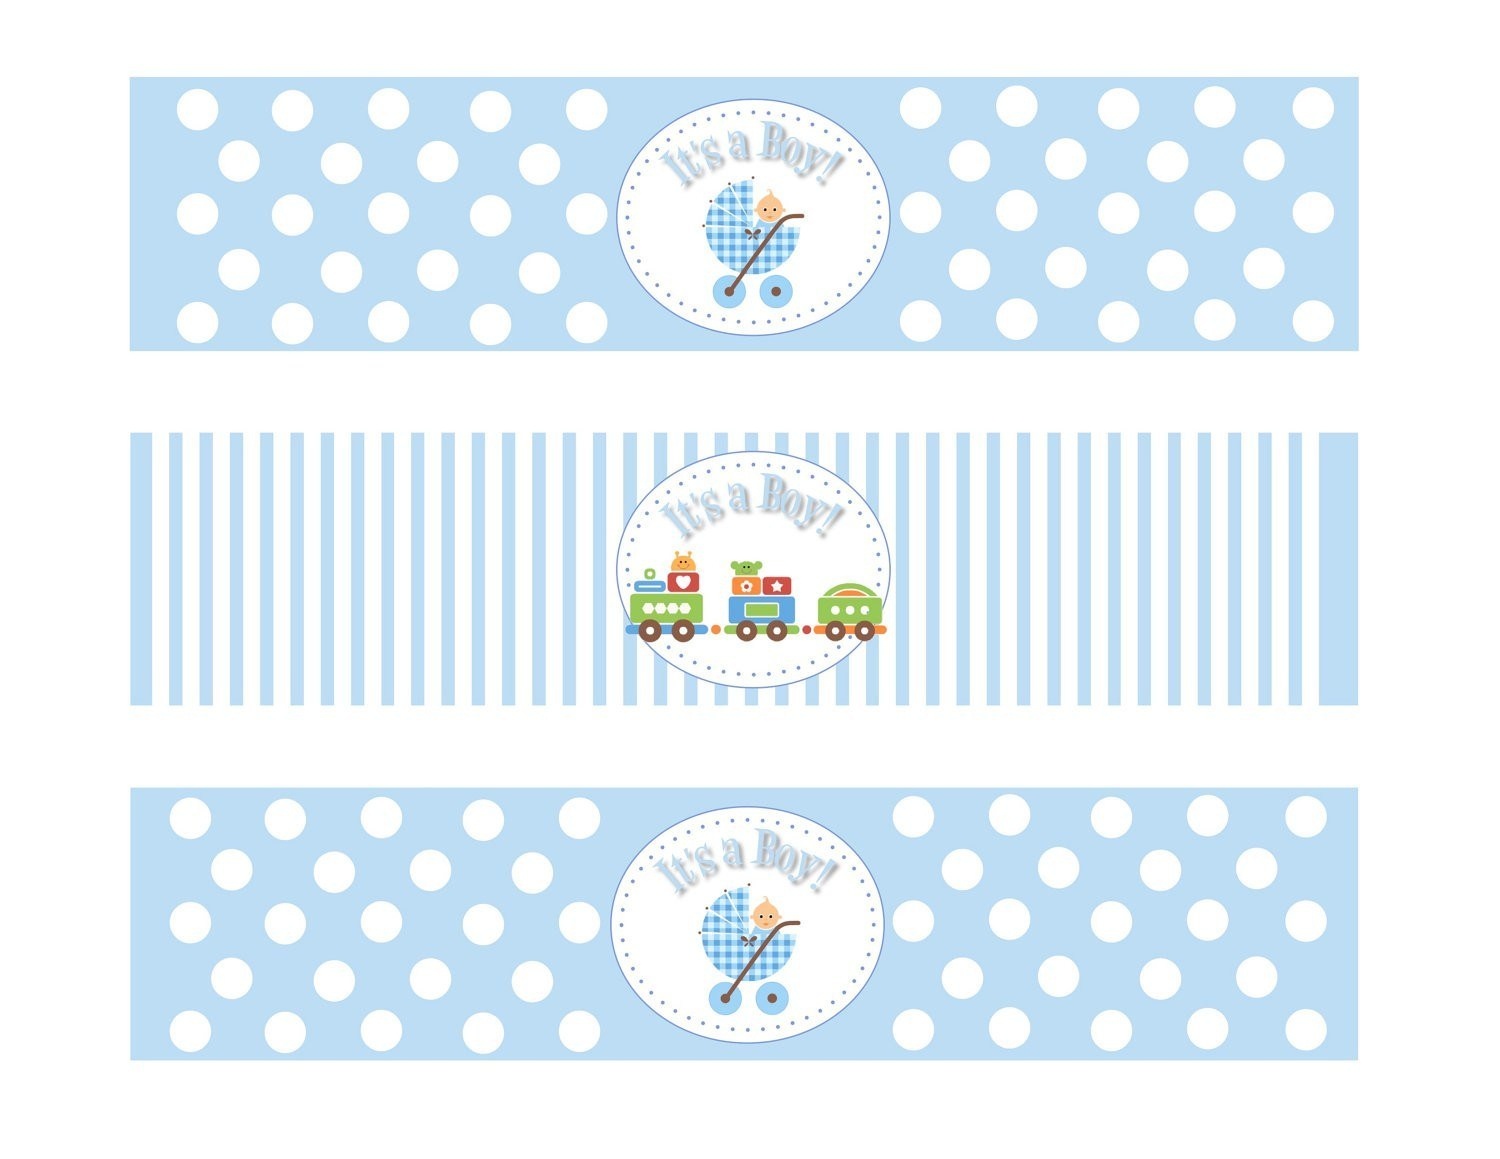 Free Printable Water Bottle Labels For Baby Shower Image Random - Free Printable Water Bottle Labels For Baby Shower